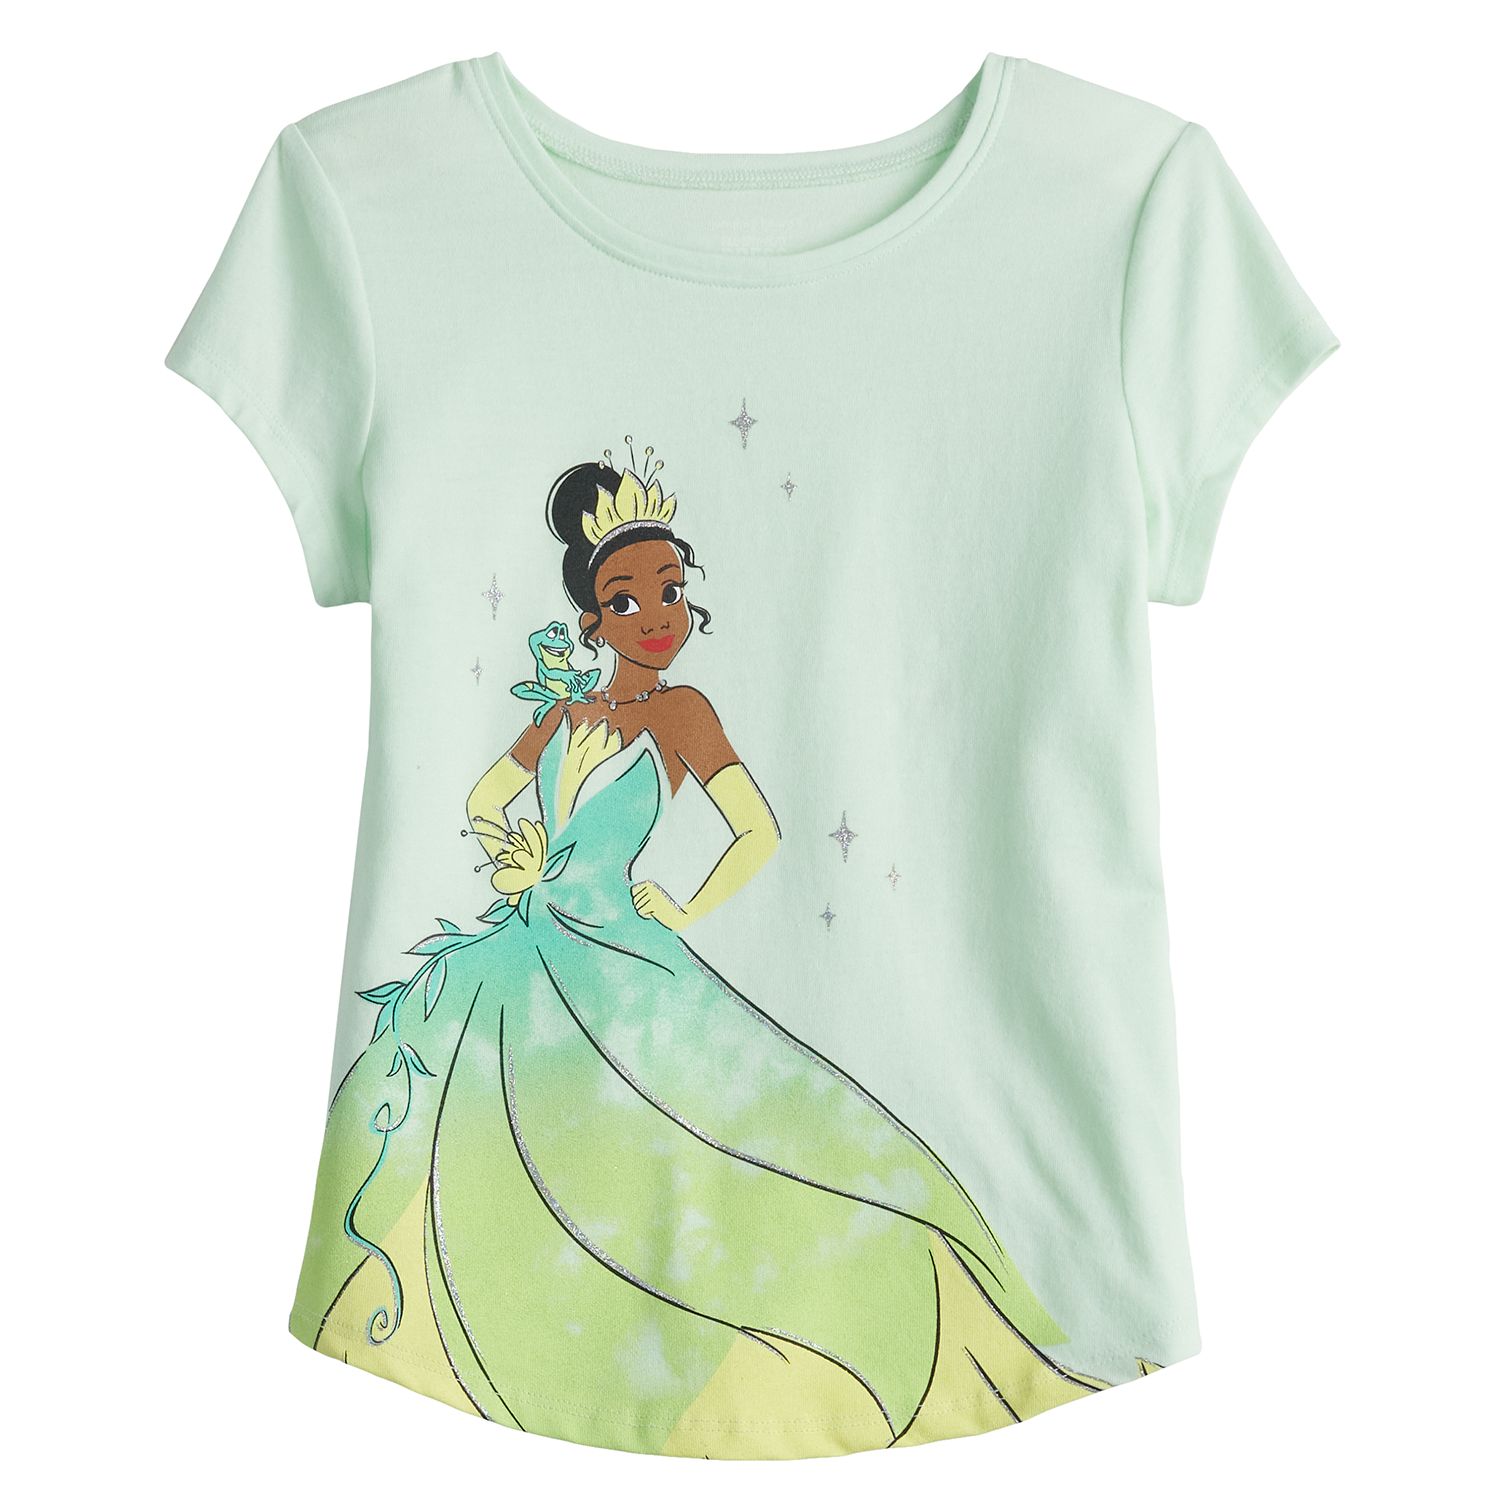 Image for Disney/Jumping Beans Disney's Tiana Toddler Girl Shirttail Tee by Jumping Beans® at Kohl's.